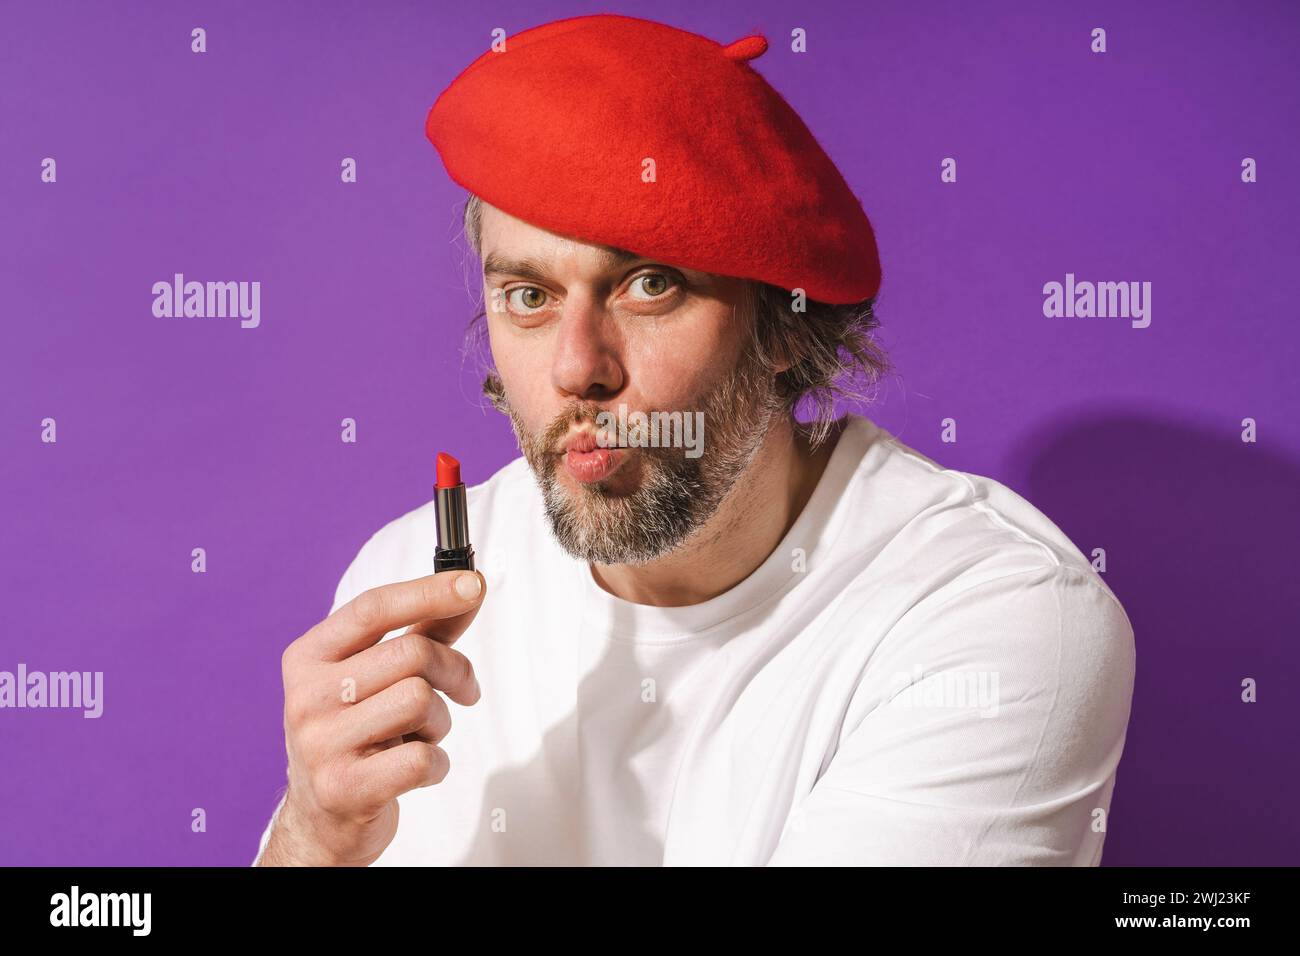 Funny middle aged man wearing red beret is holding lipstick in his hand against purple background Stock Photo